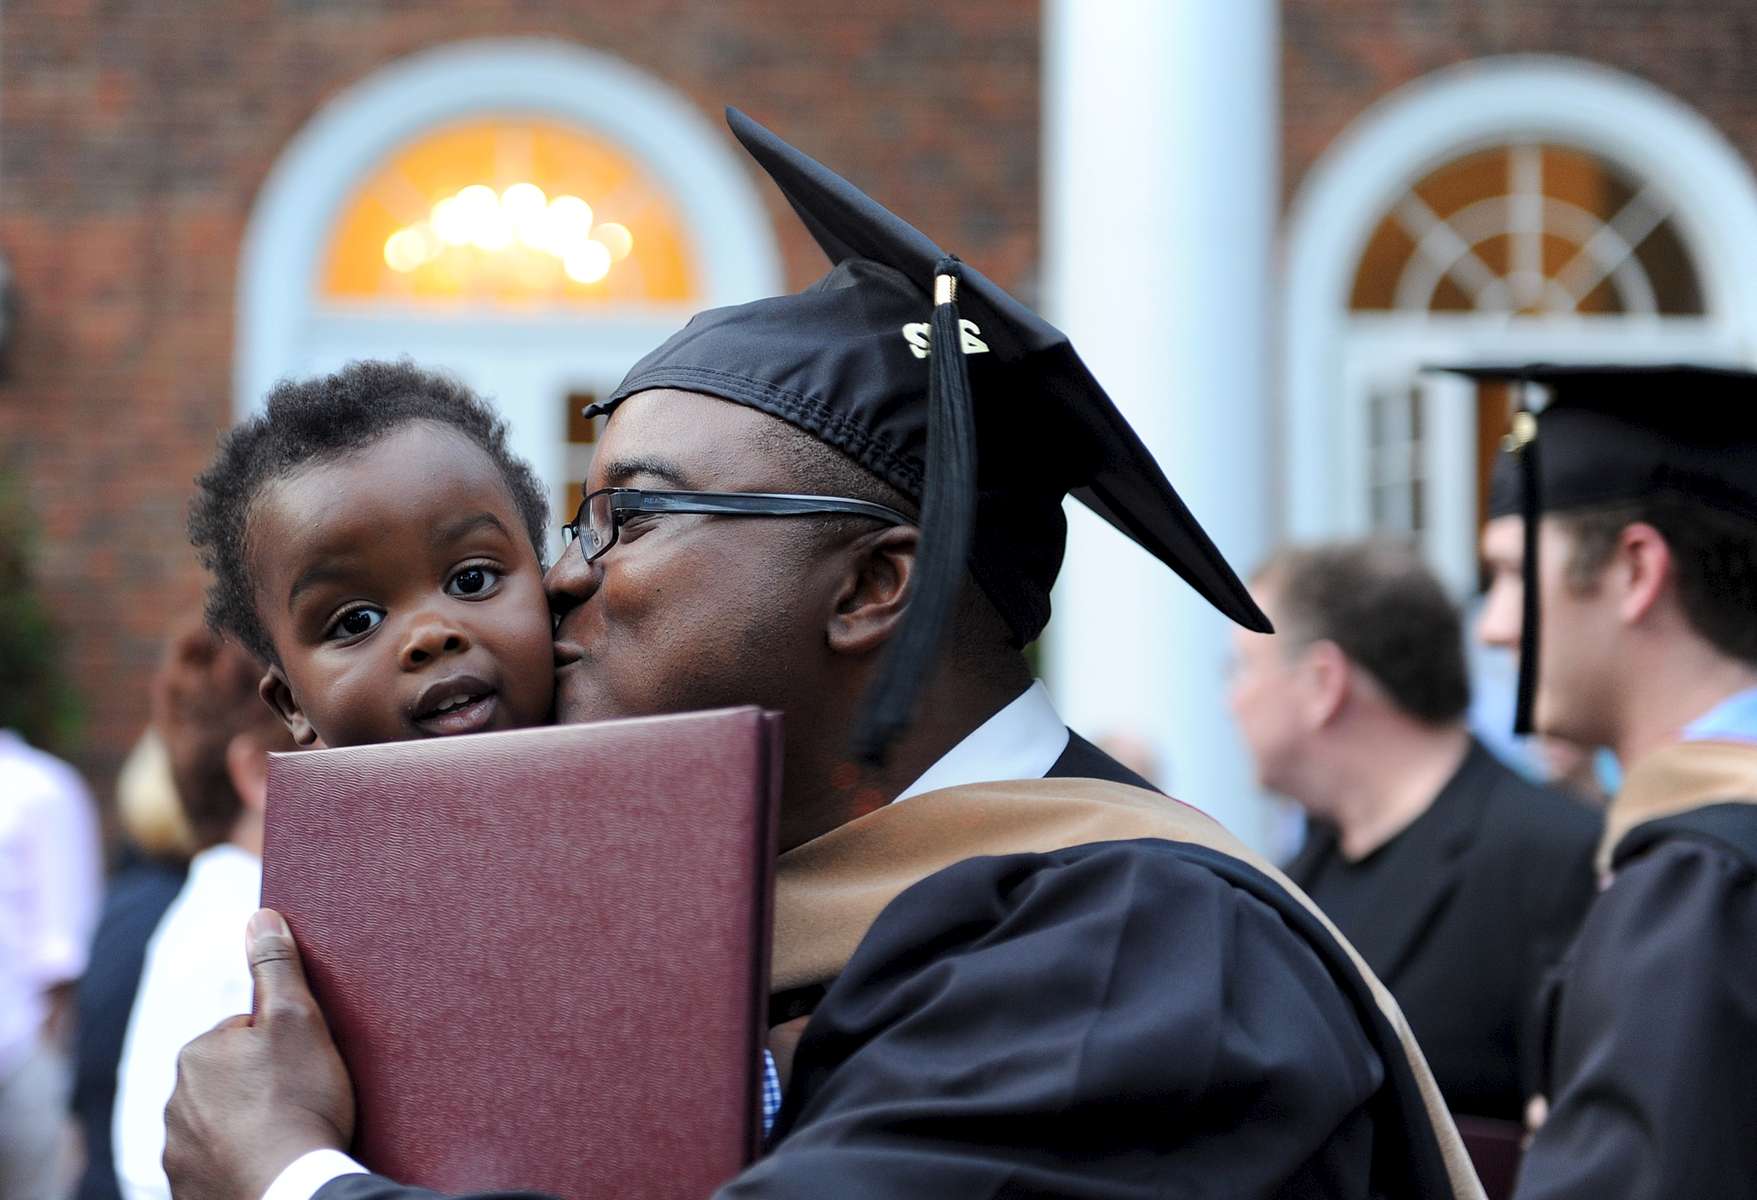 A graduate of Elon's MBA program is greeted by his son after leaving the ceremony.